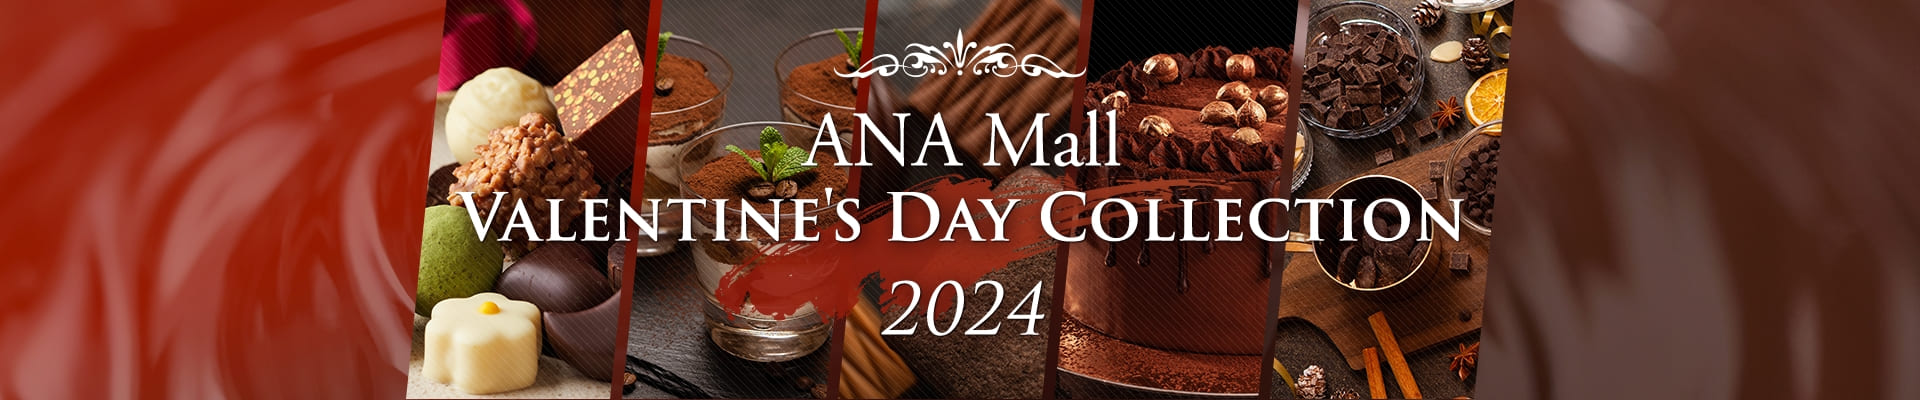 ANA Mall VALENTINE'S DAY COLLECTION 2024